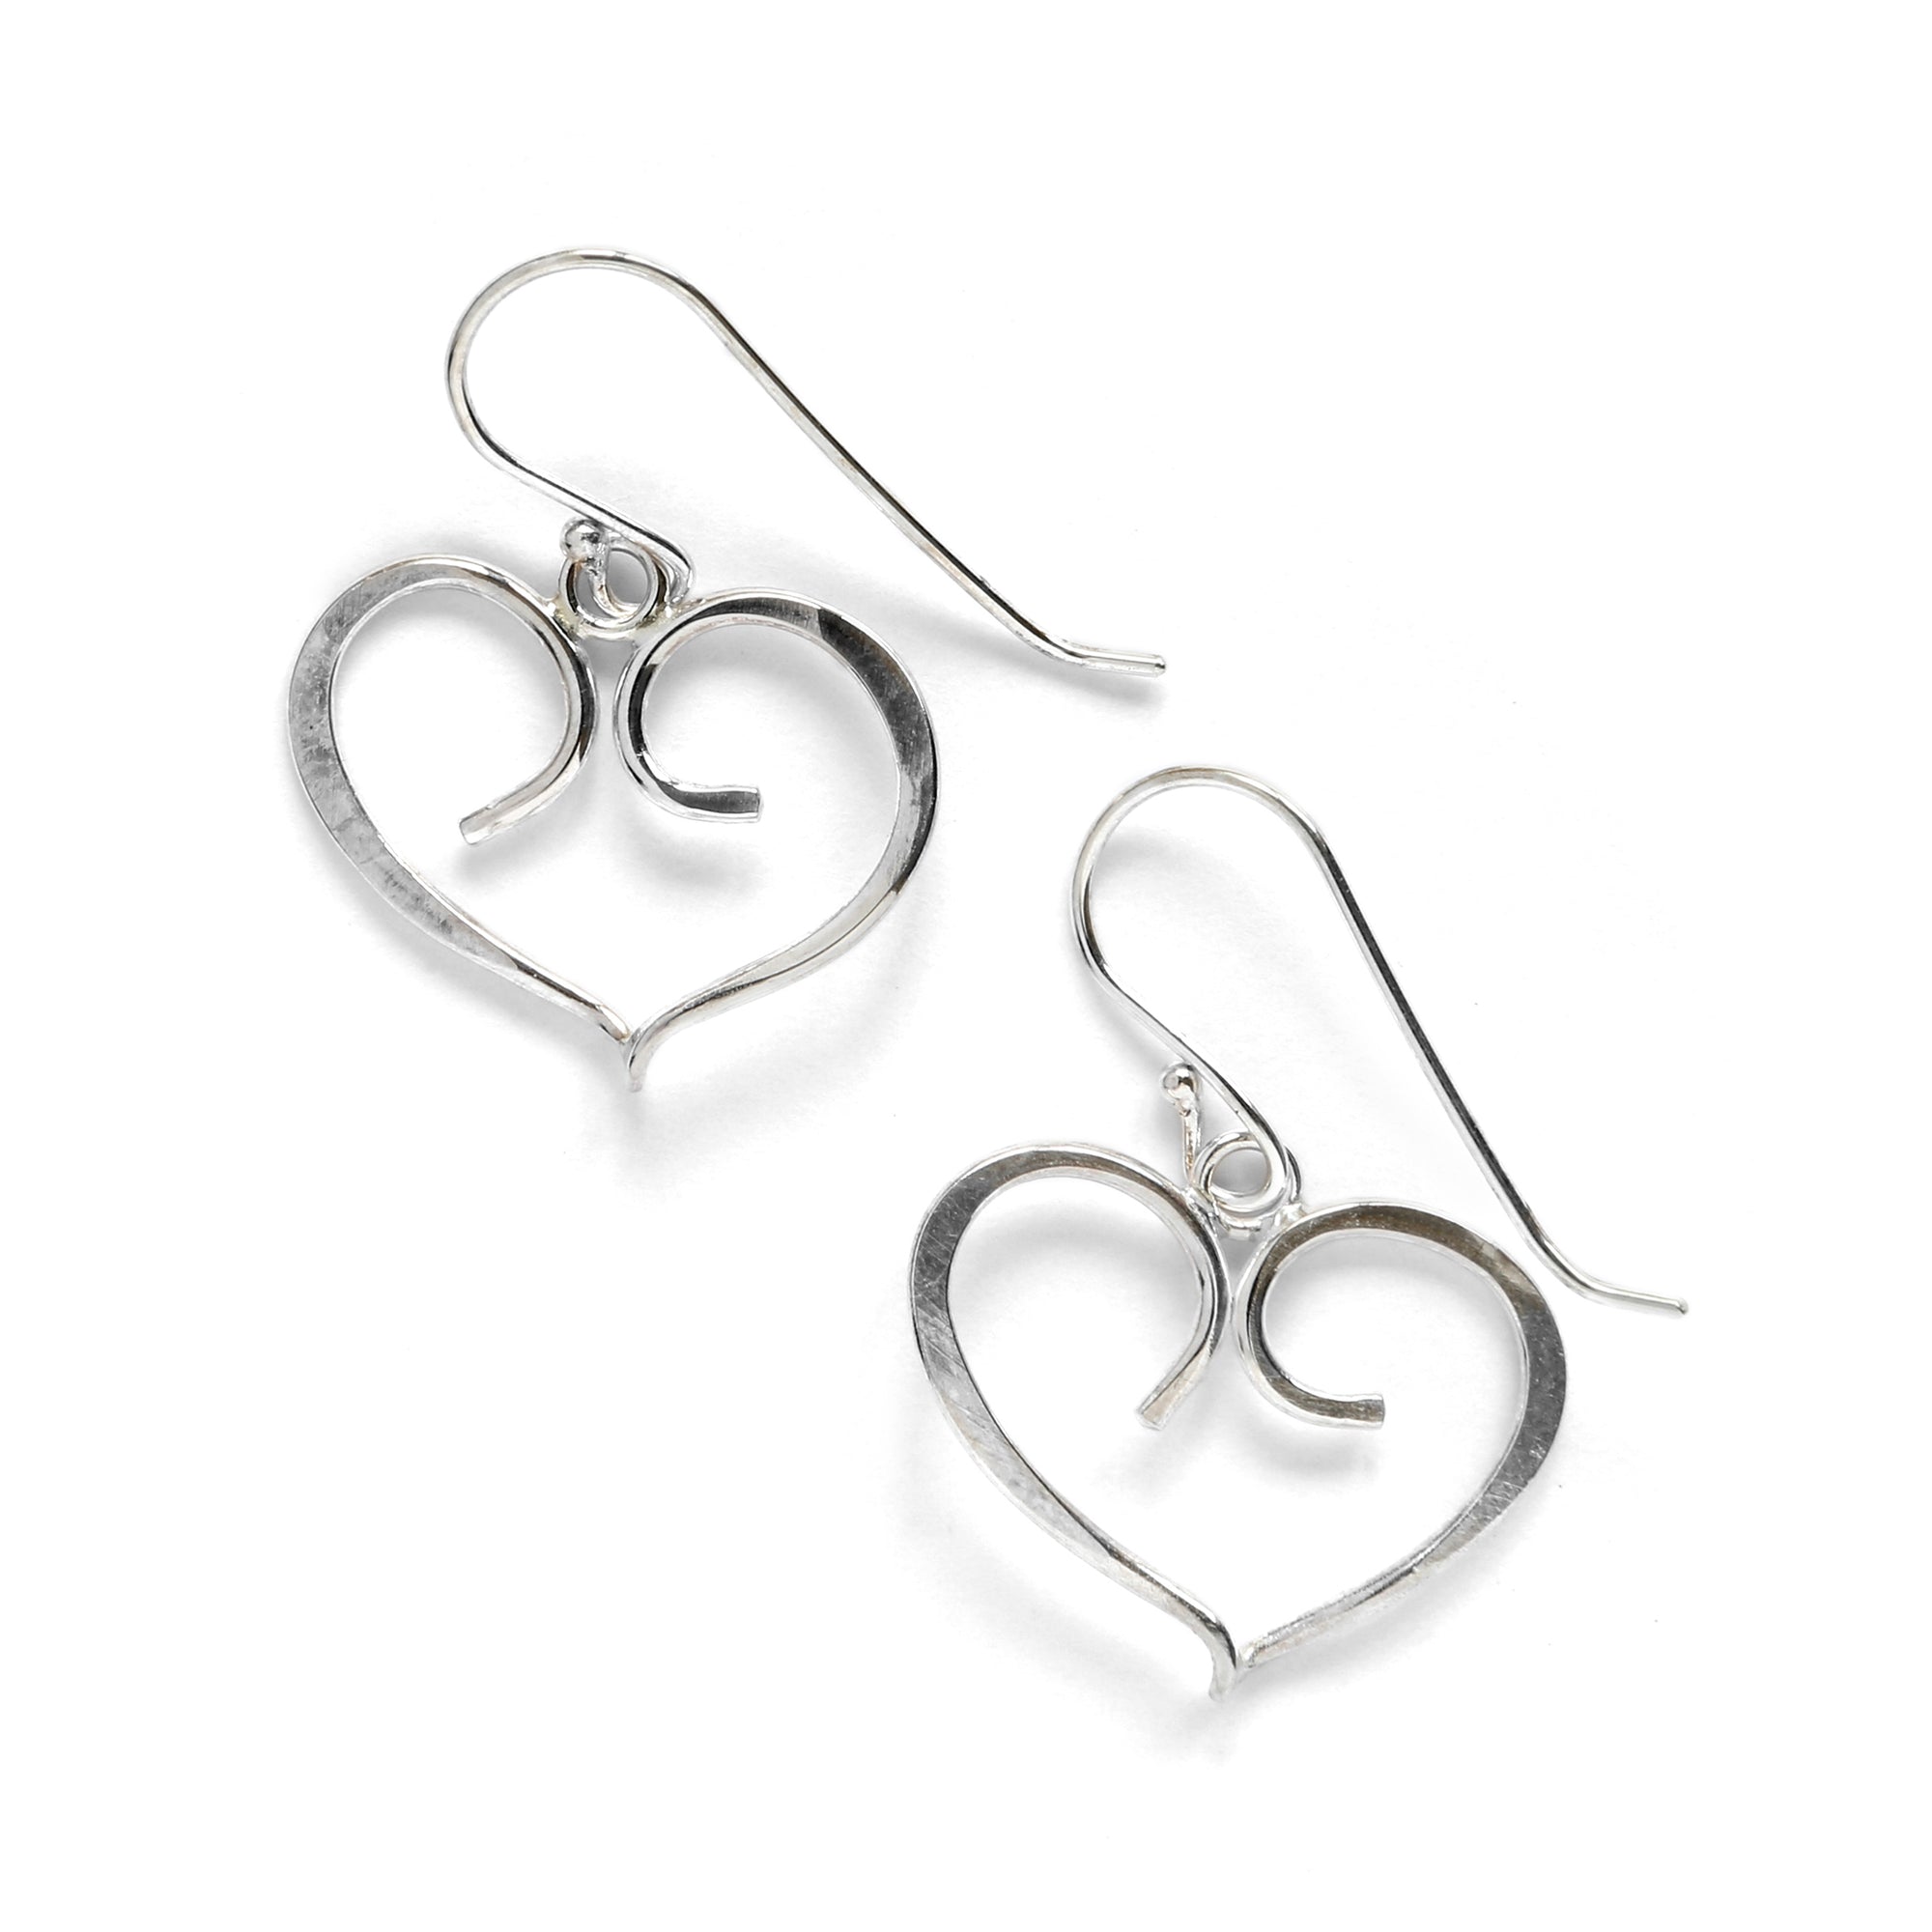 Forged Heart Earring